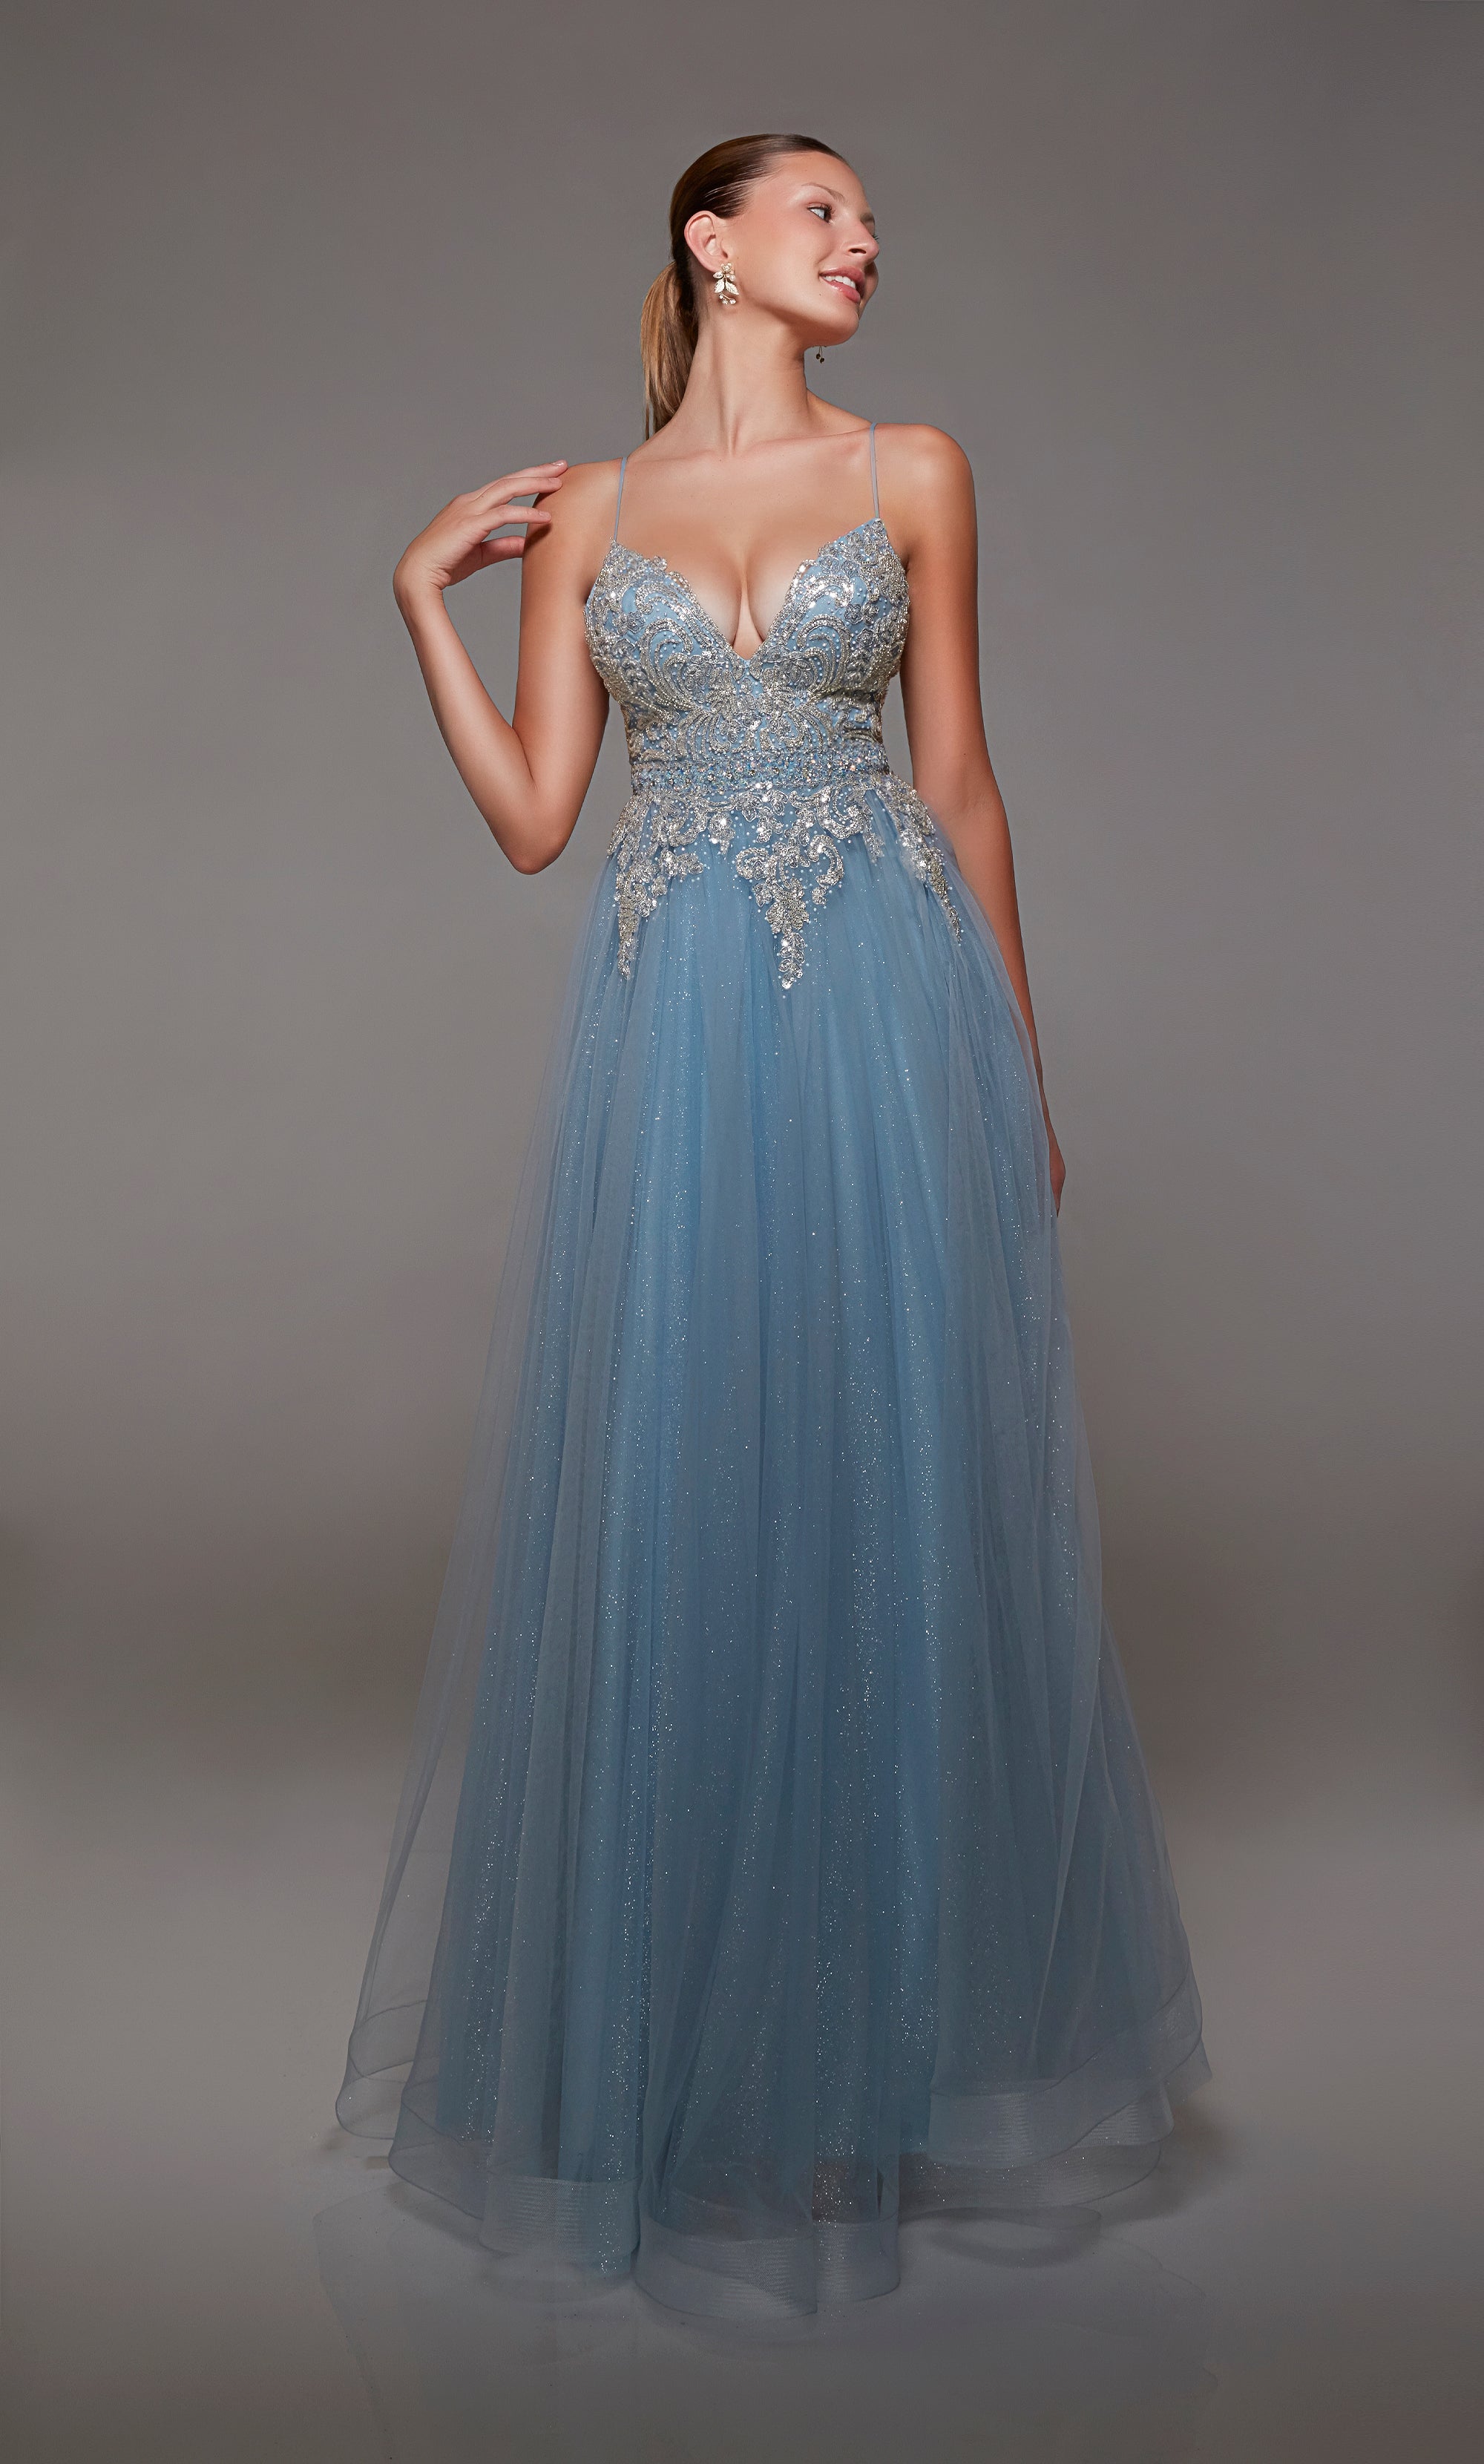 French blue glitter tulle formal dress: Plunging neckline, beaded lace bodice, zip-up back, and spaghetti straps for an elegant and enchanting look.